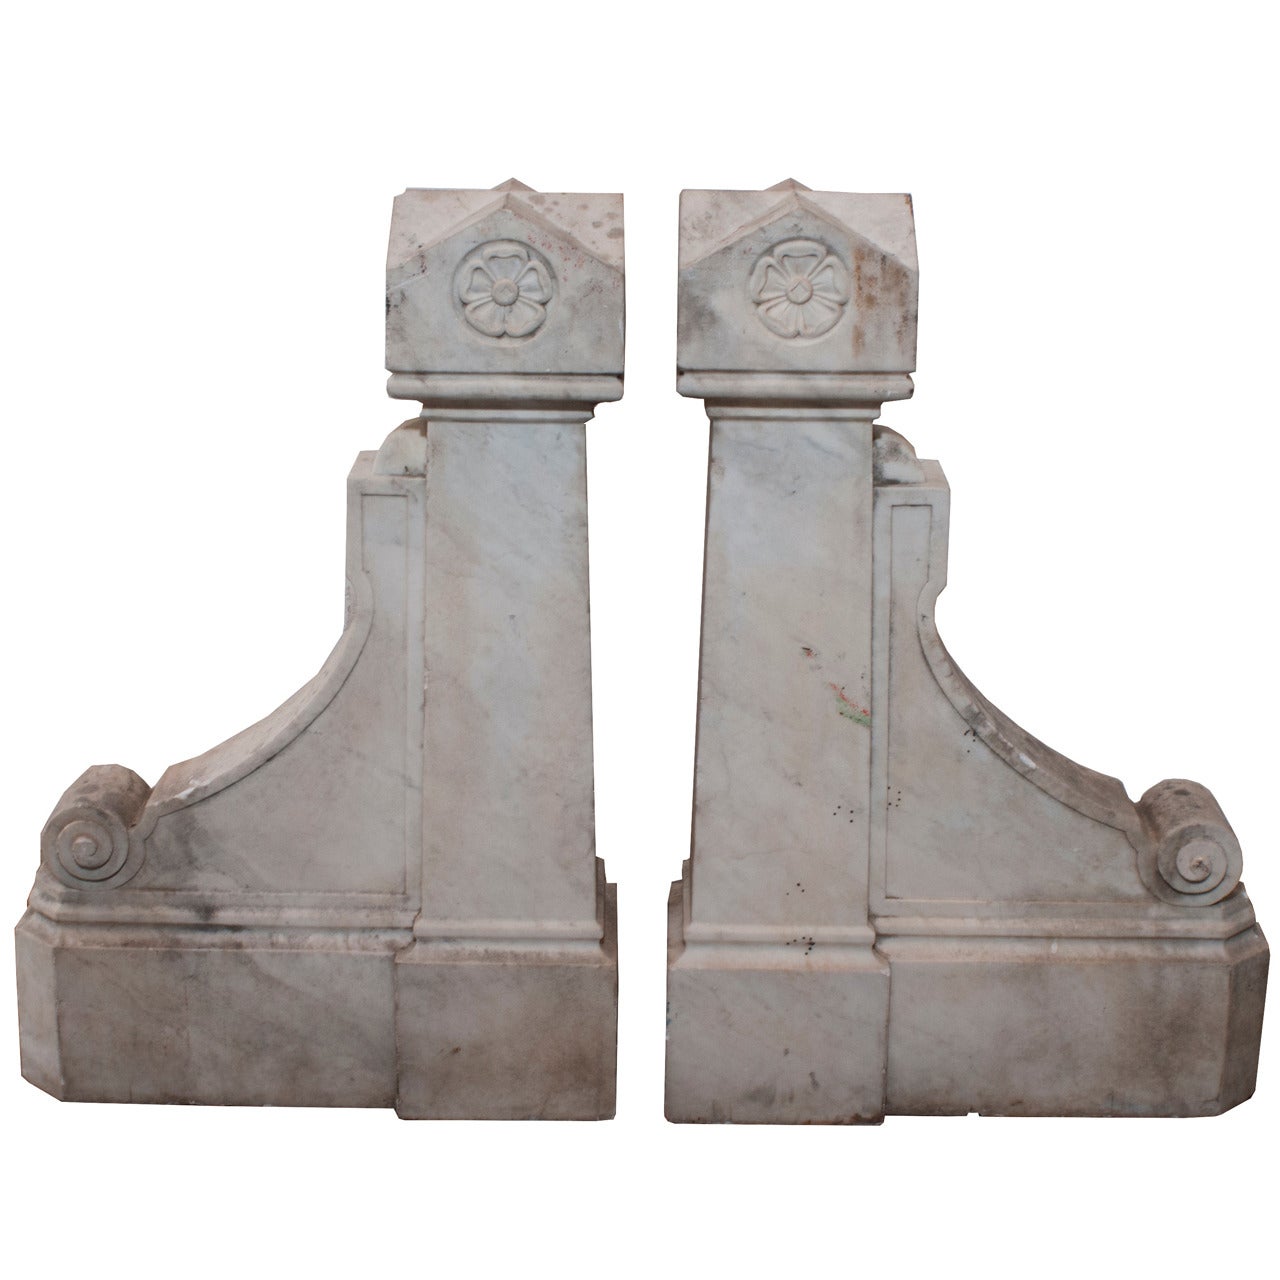 A Pair of Architectural Fragments